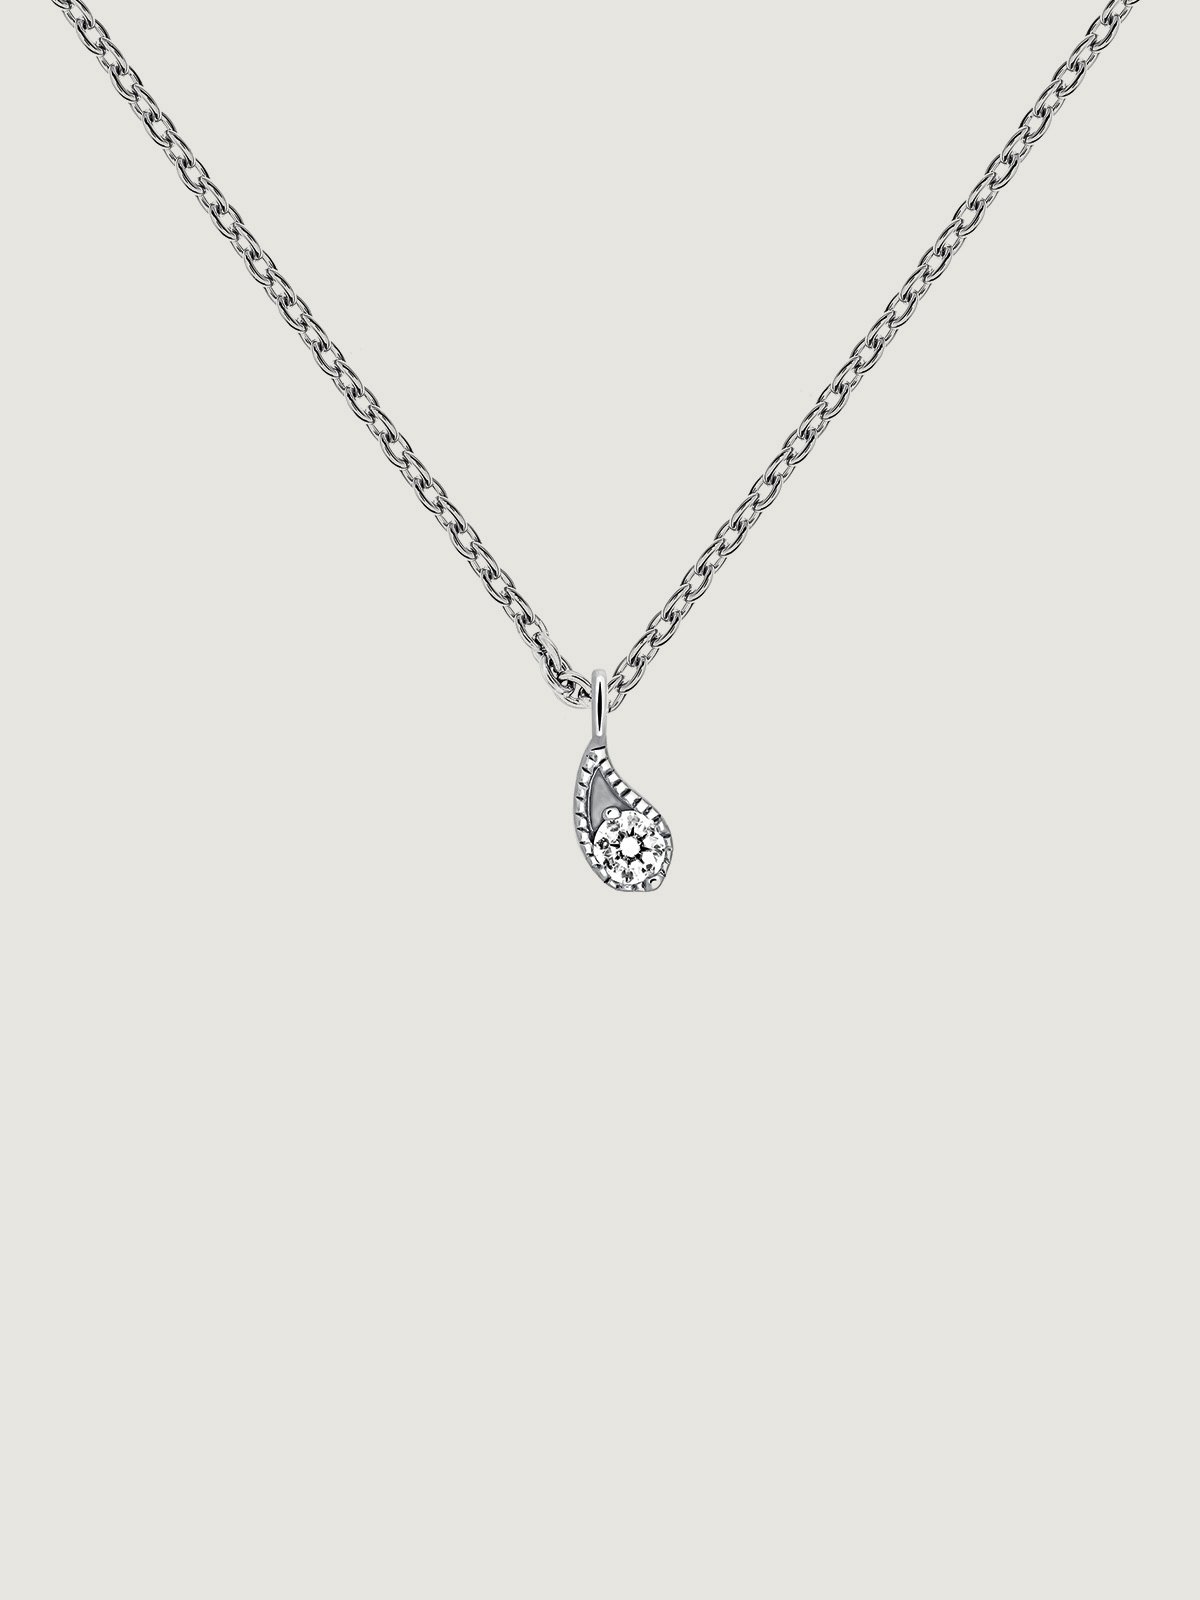 9K white gold pendant with drop and white diamonds